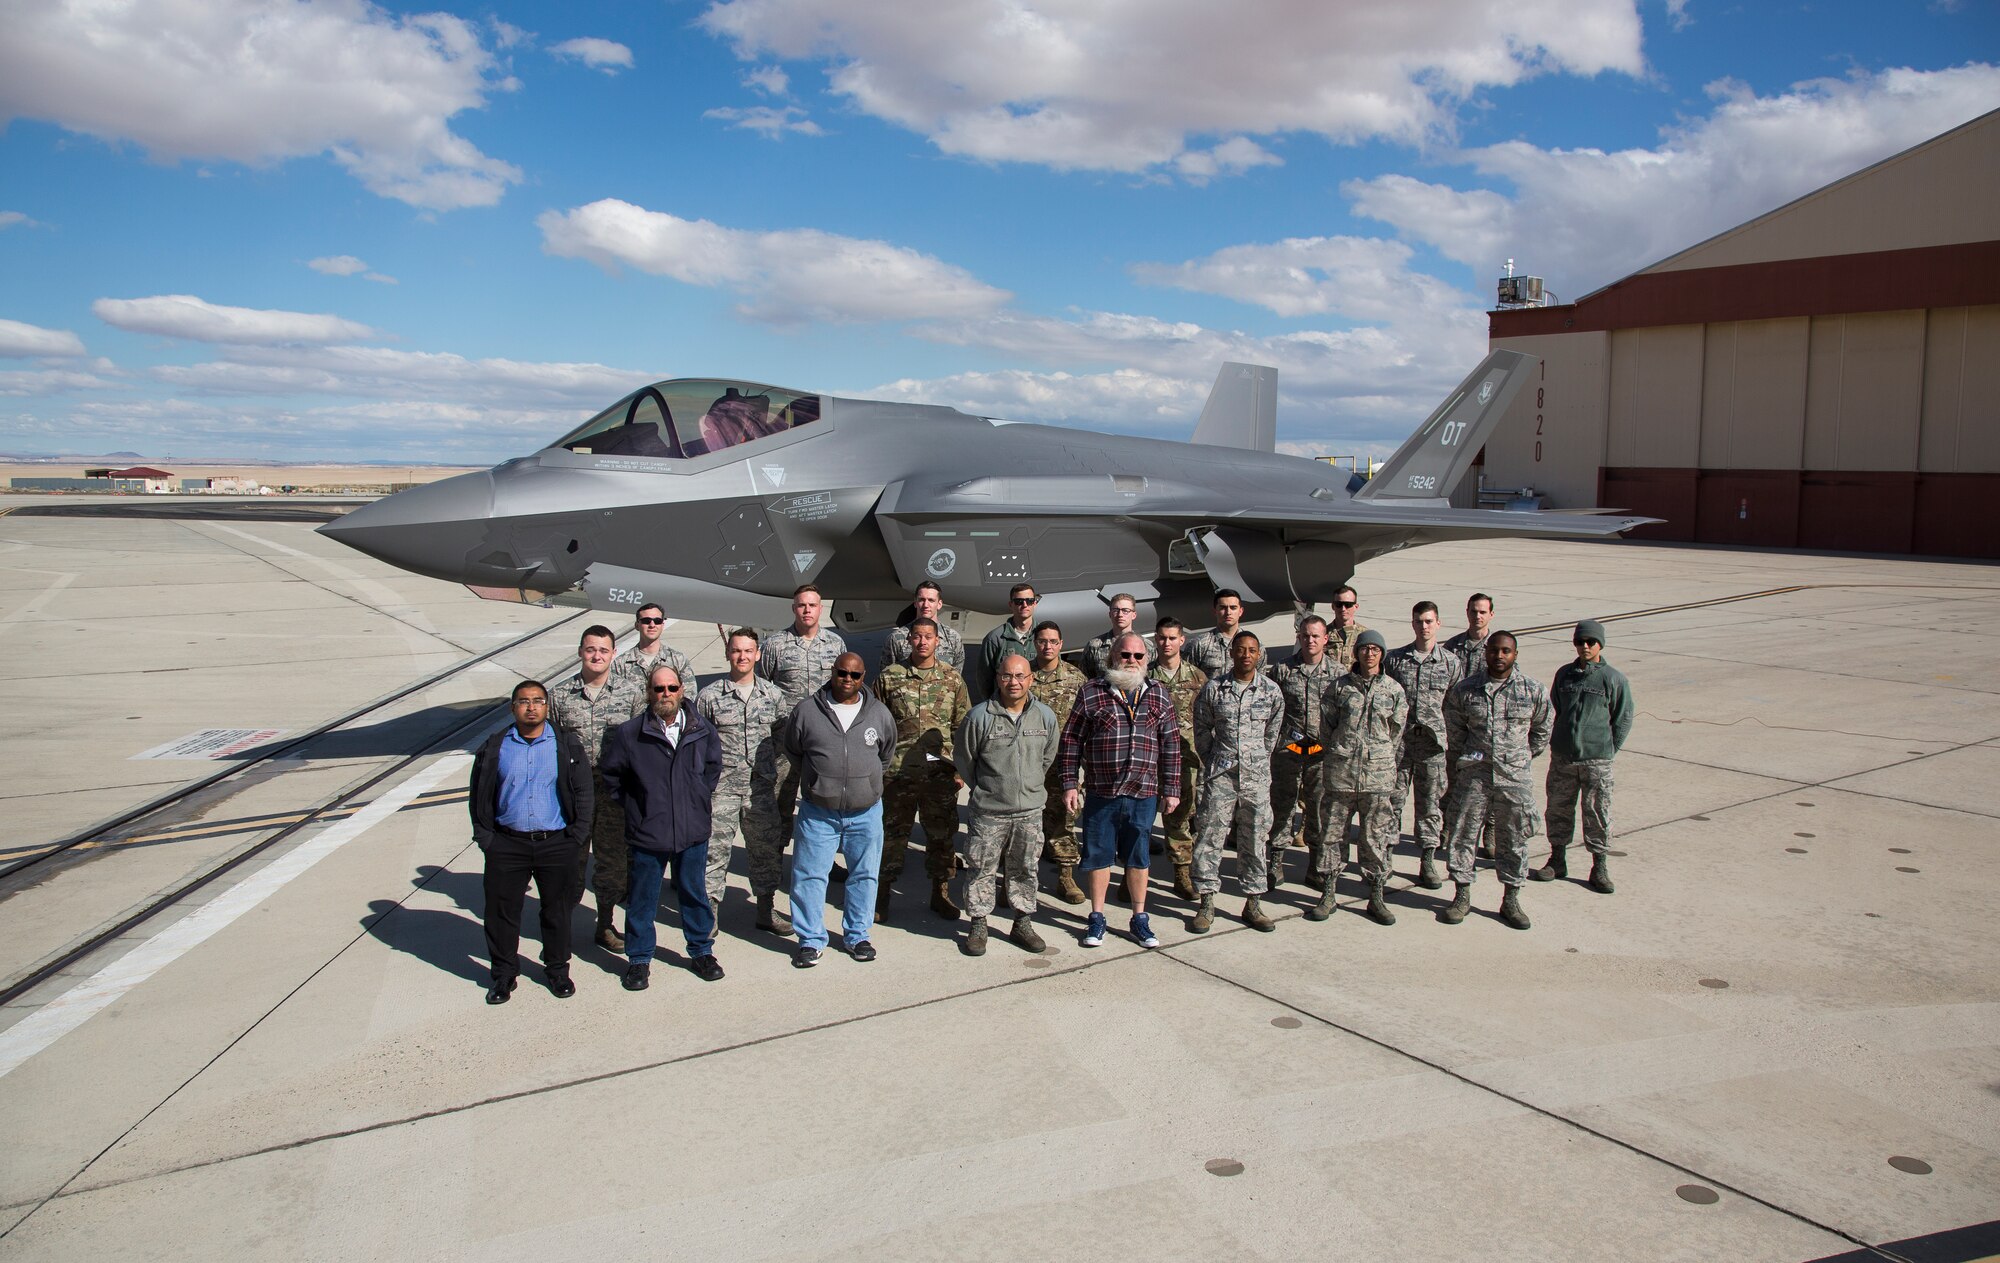 Members of the 461st Flight Test Squadron pose for a photo in front of a newly delivered F-35A March 7, 2019. (Courtesy photo by Chad Bellay/Lockheed Martin)